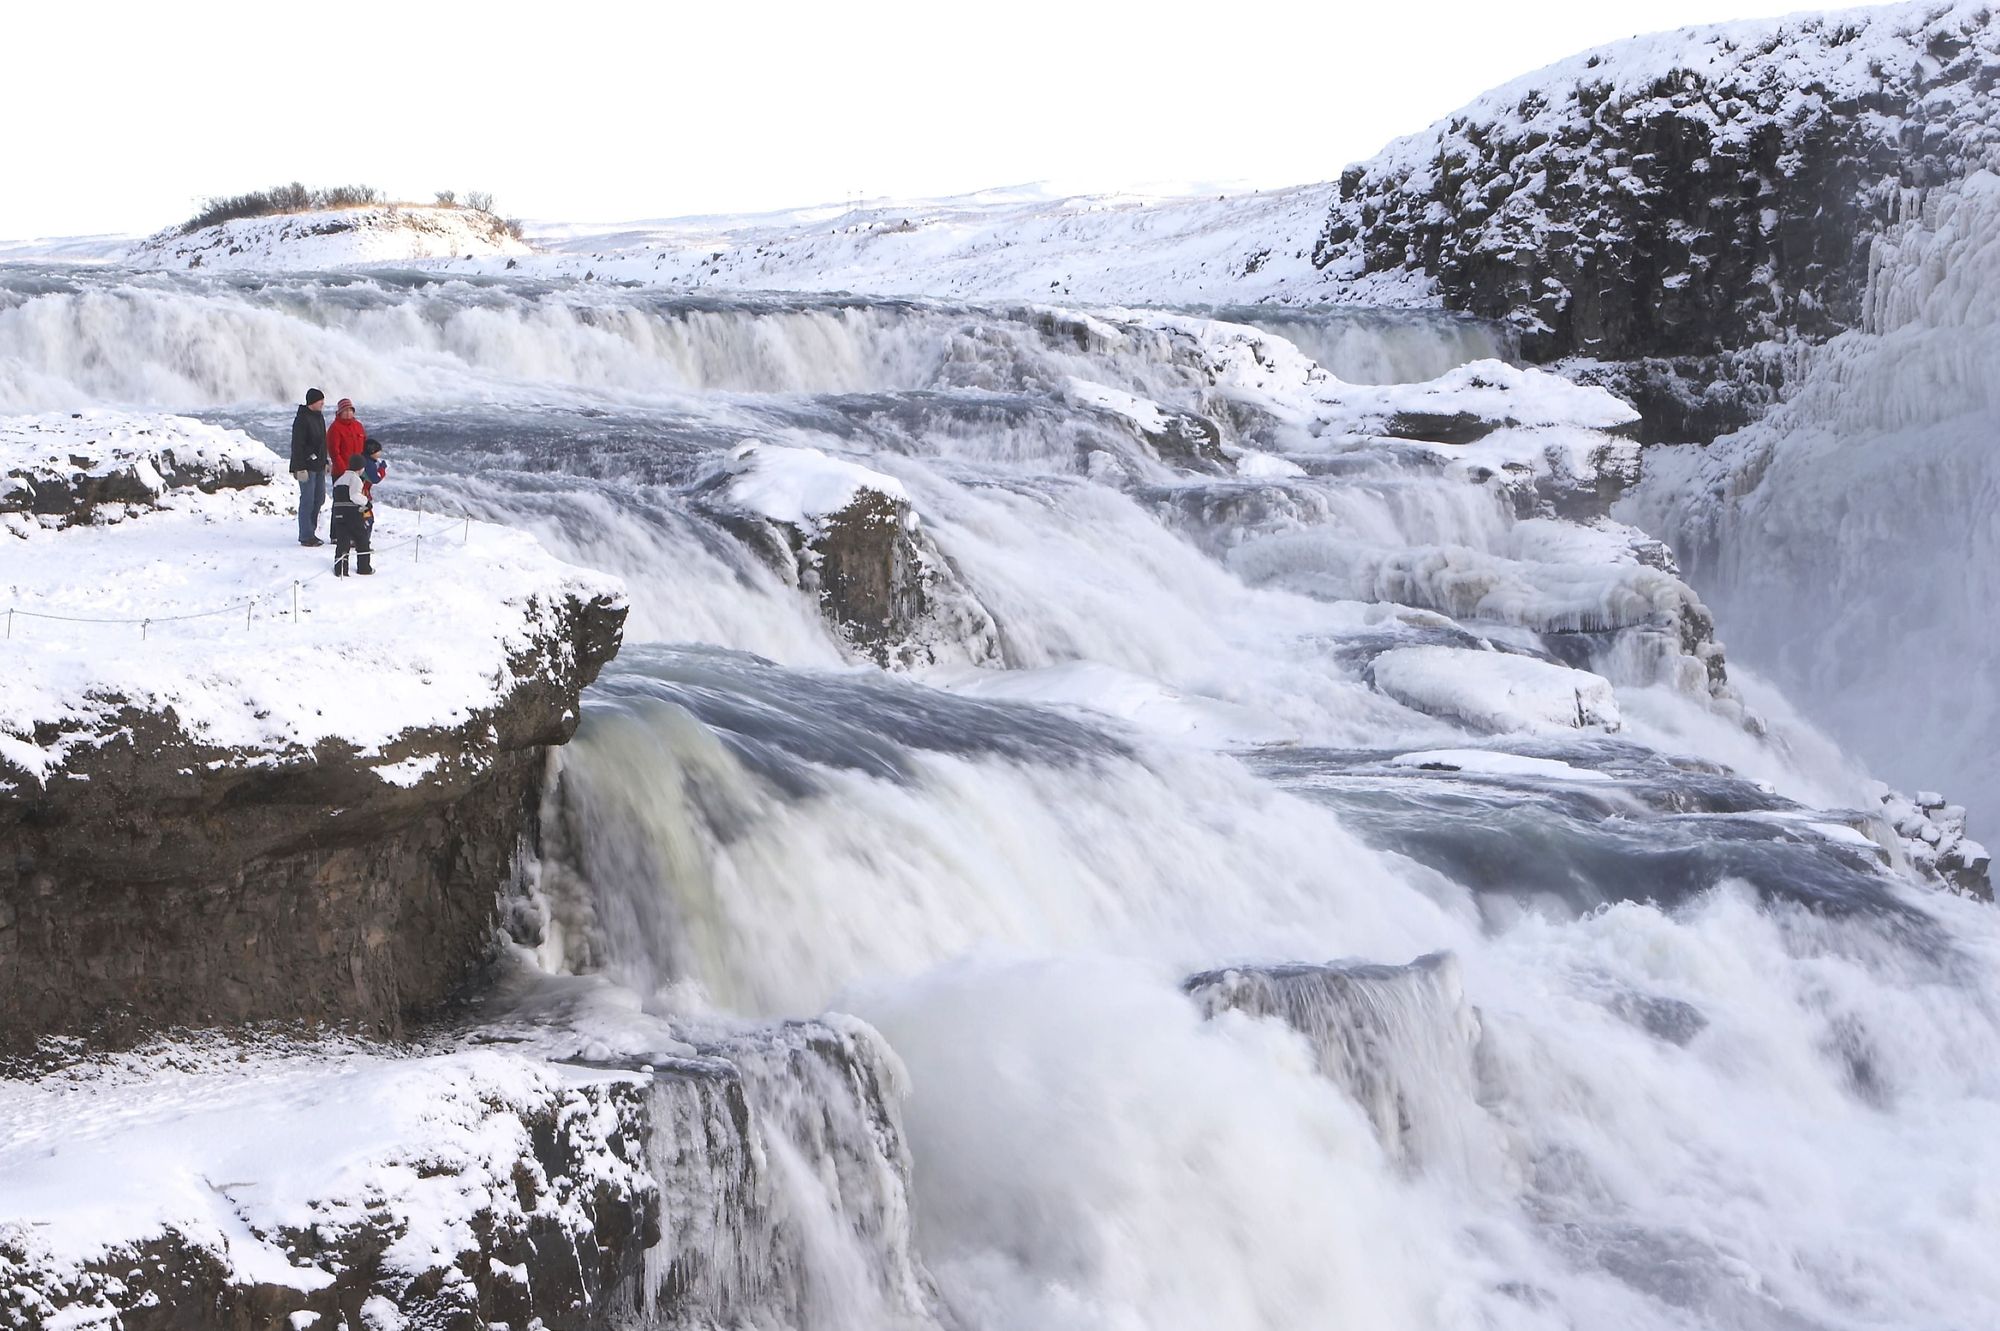 Overlooking a set of stunning waterfalls in Iceland. Photo: Icelandic Mountain Guides / MBA